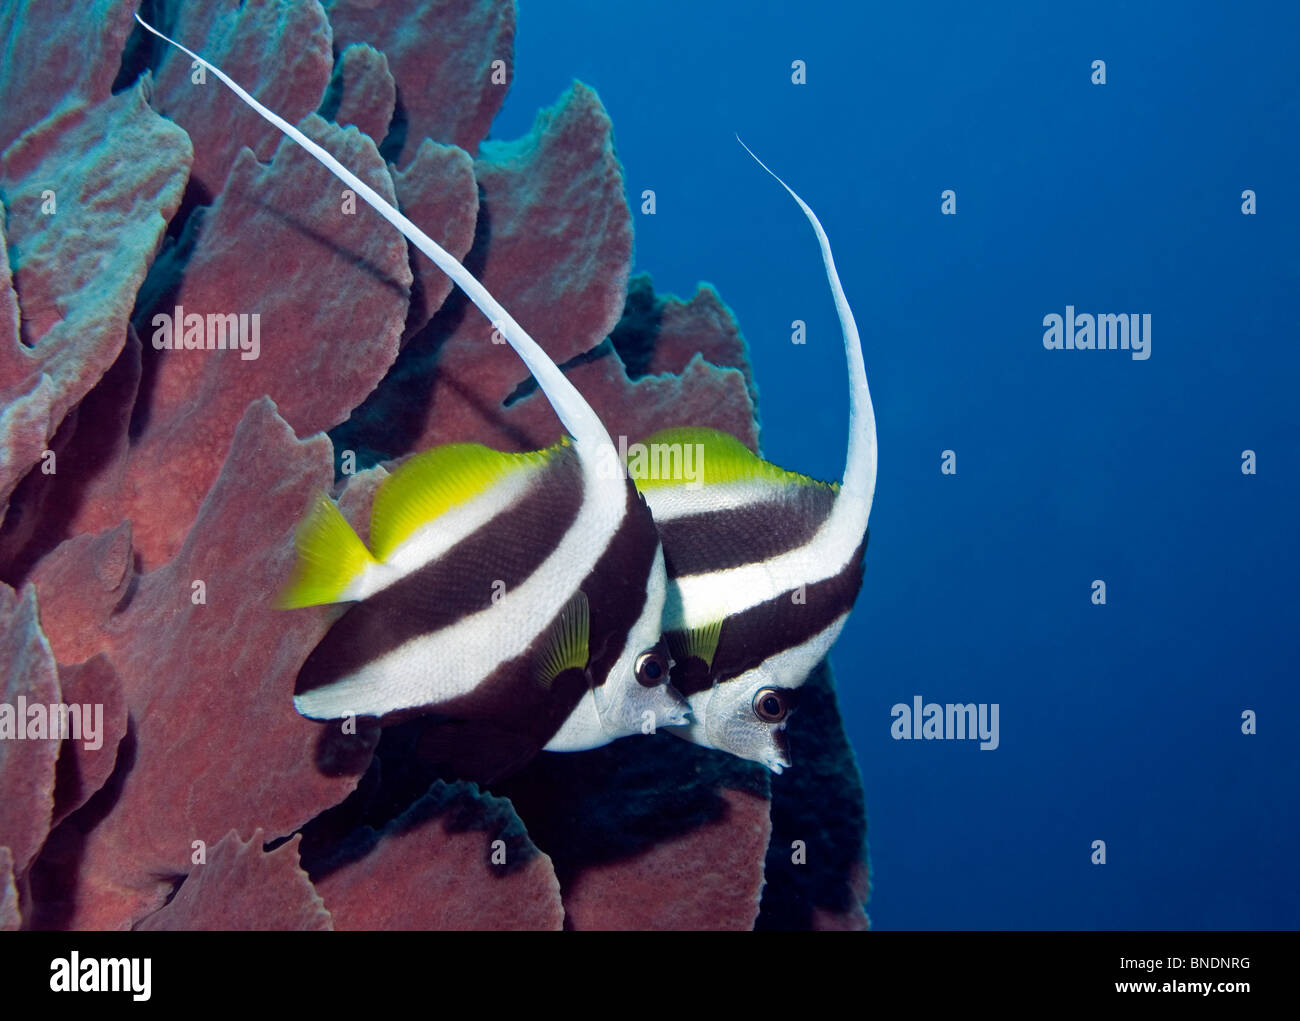 a pair of longfinned bannerfish swimming in front of a sea sponge, Uepi, Solomon Islands Stock Photo